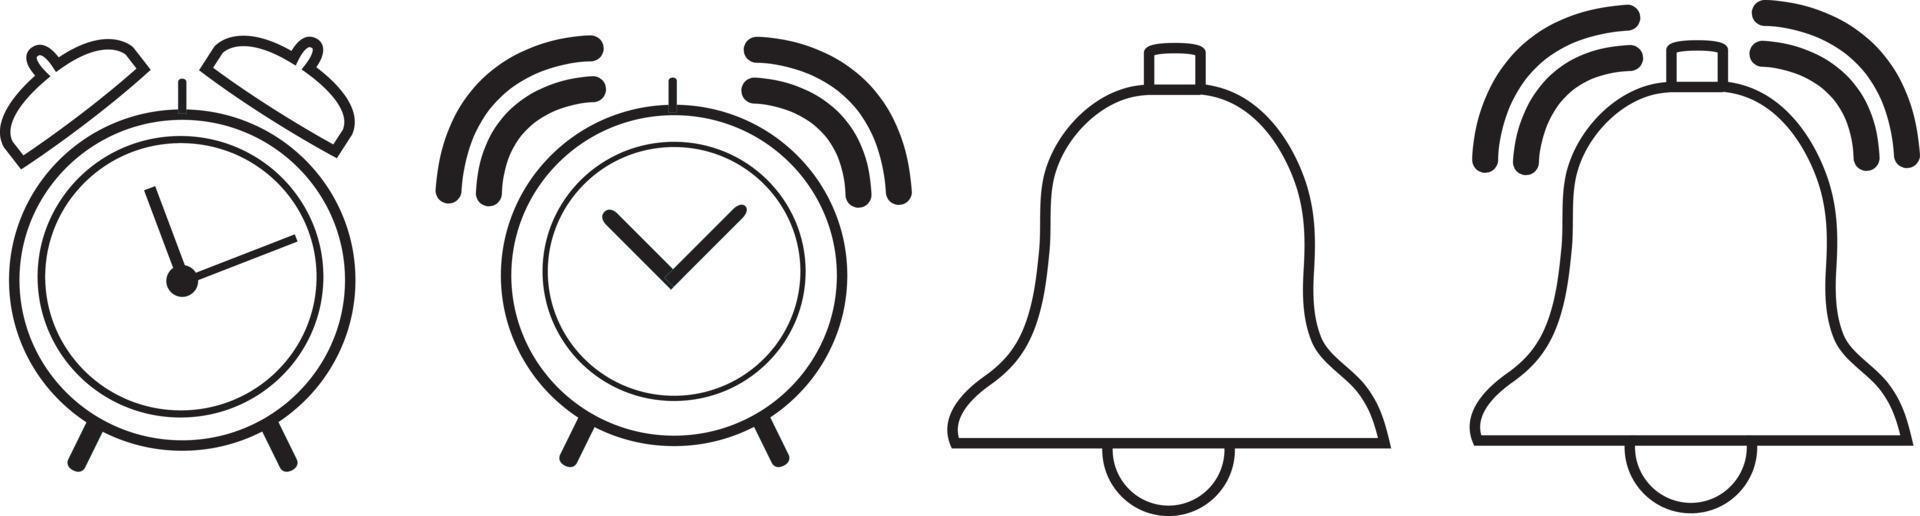 Set alarm clock and bell icon. Bell Icon isolated. Line style clock alarm. Vector ringing bell and notification number sign for alarm clock